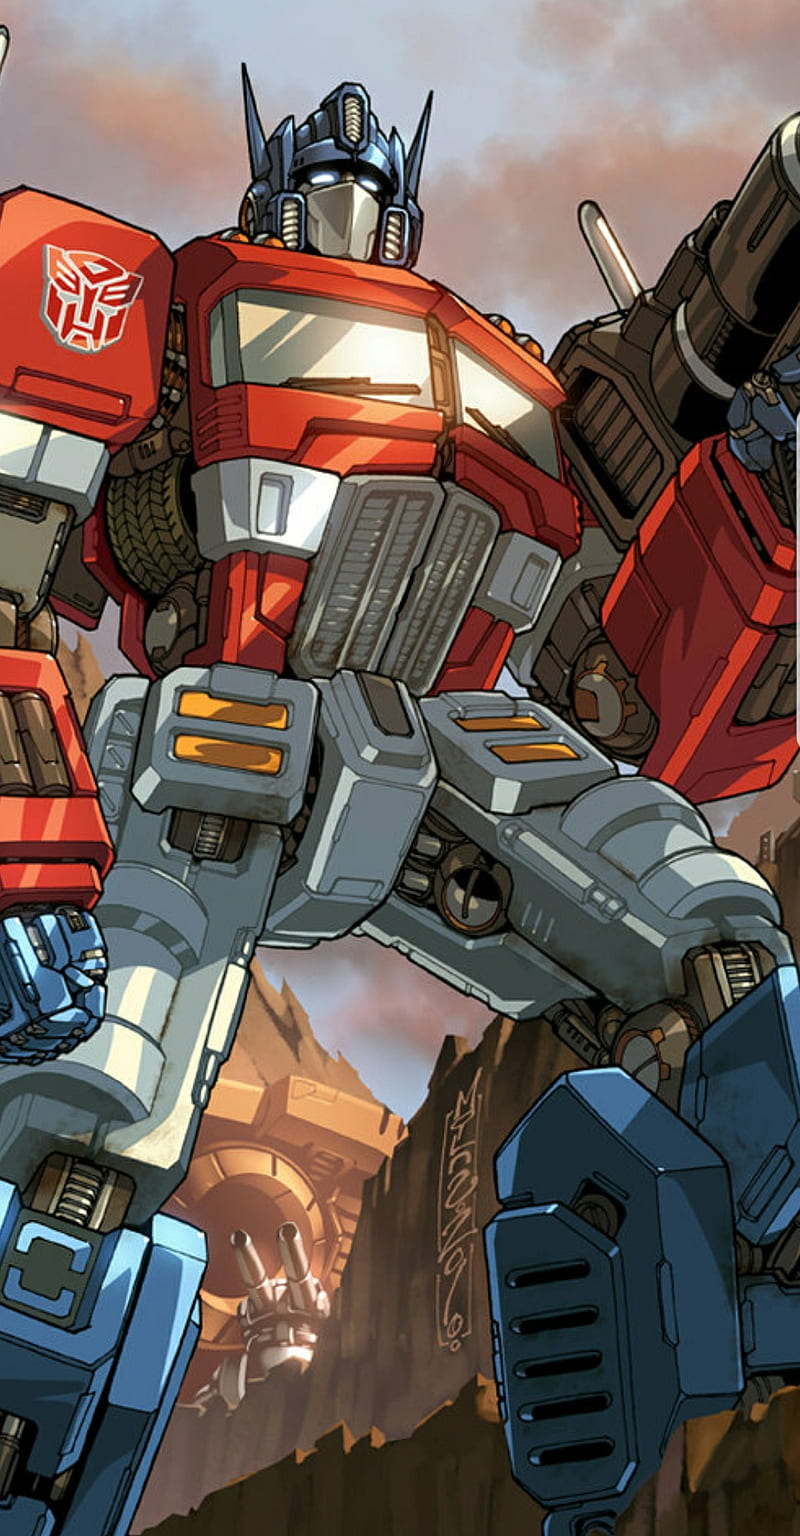 Optimus Prime, give me your face